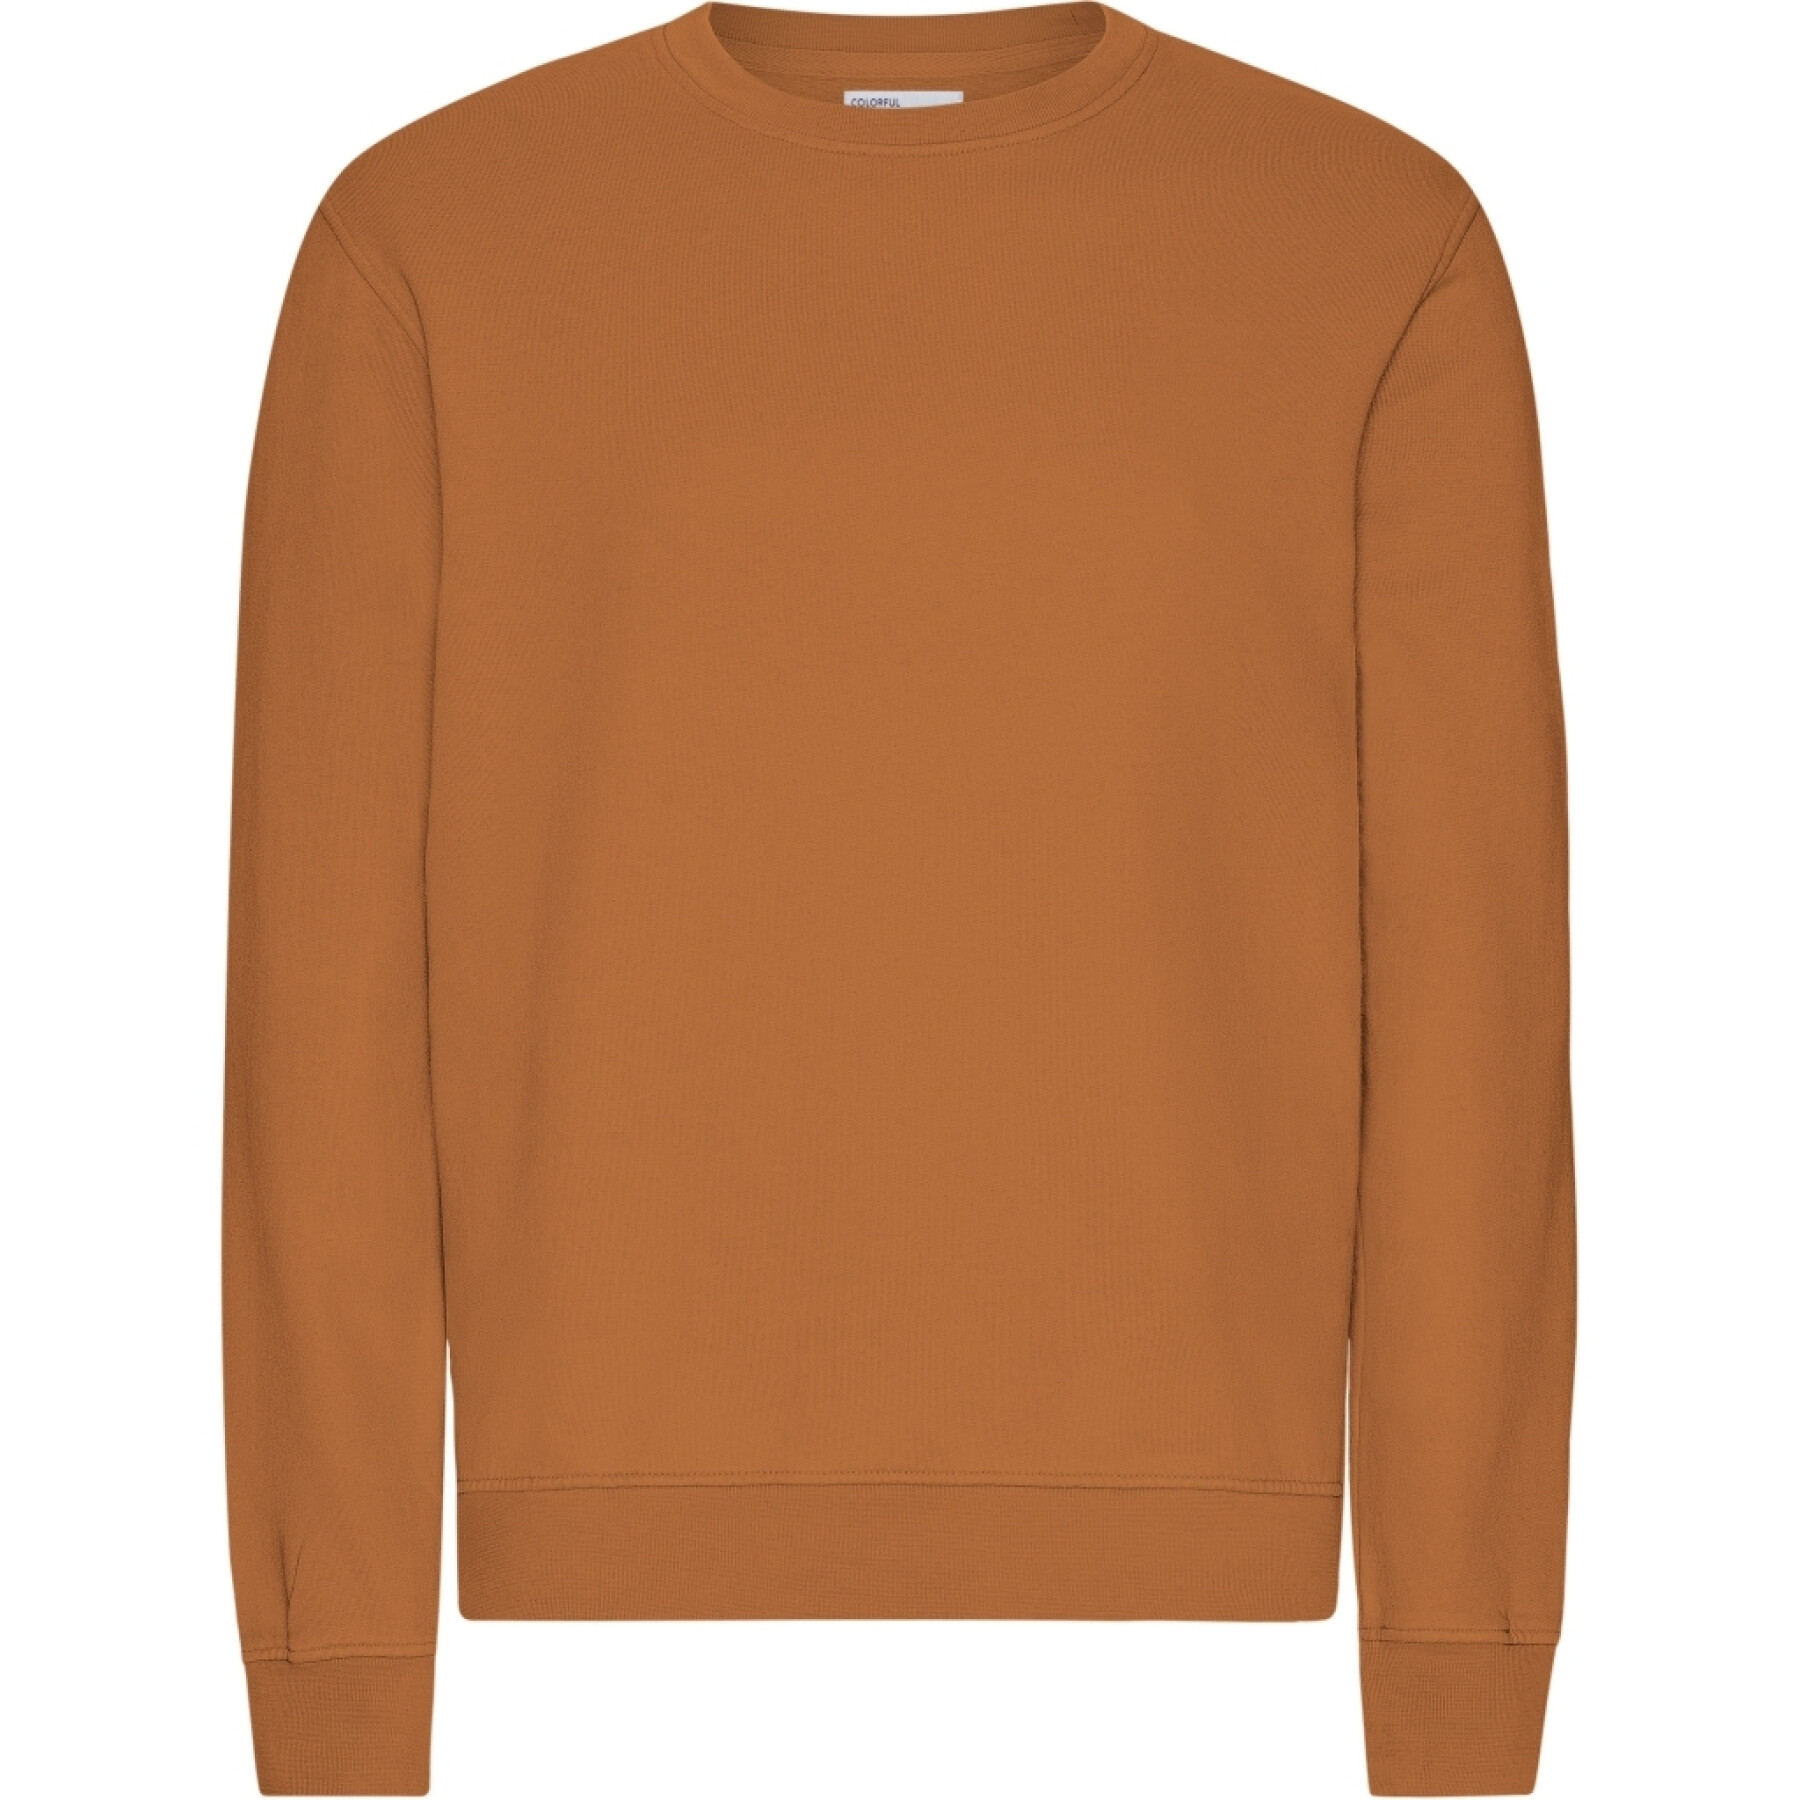 Pullover Colorful Standard Classic Organic Ginger Brown